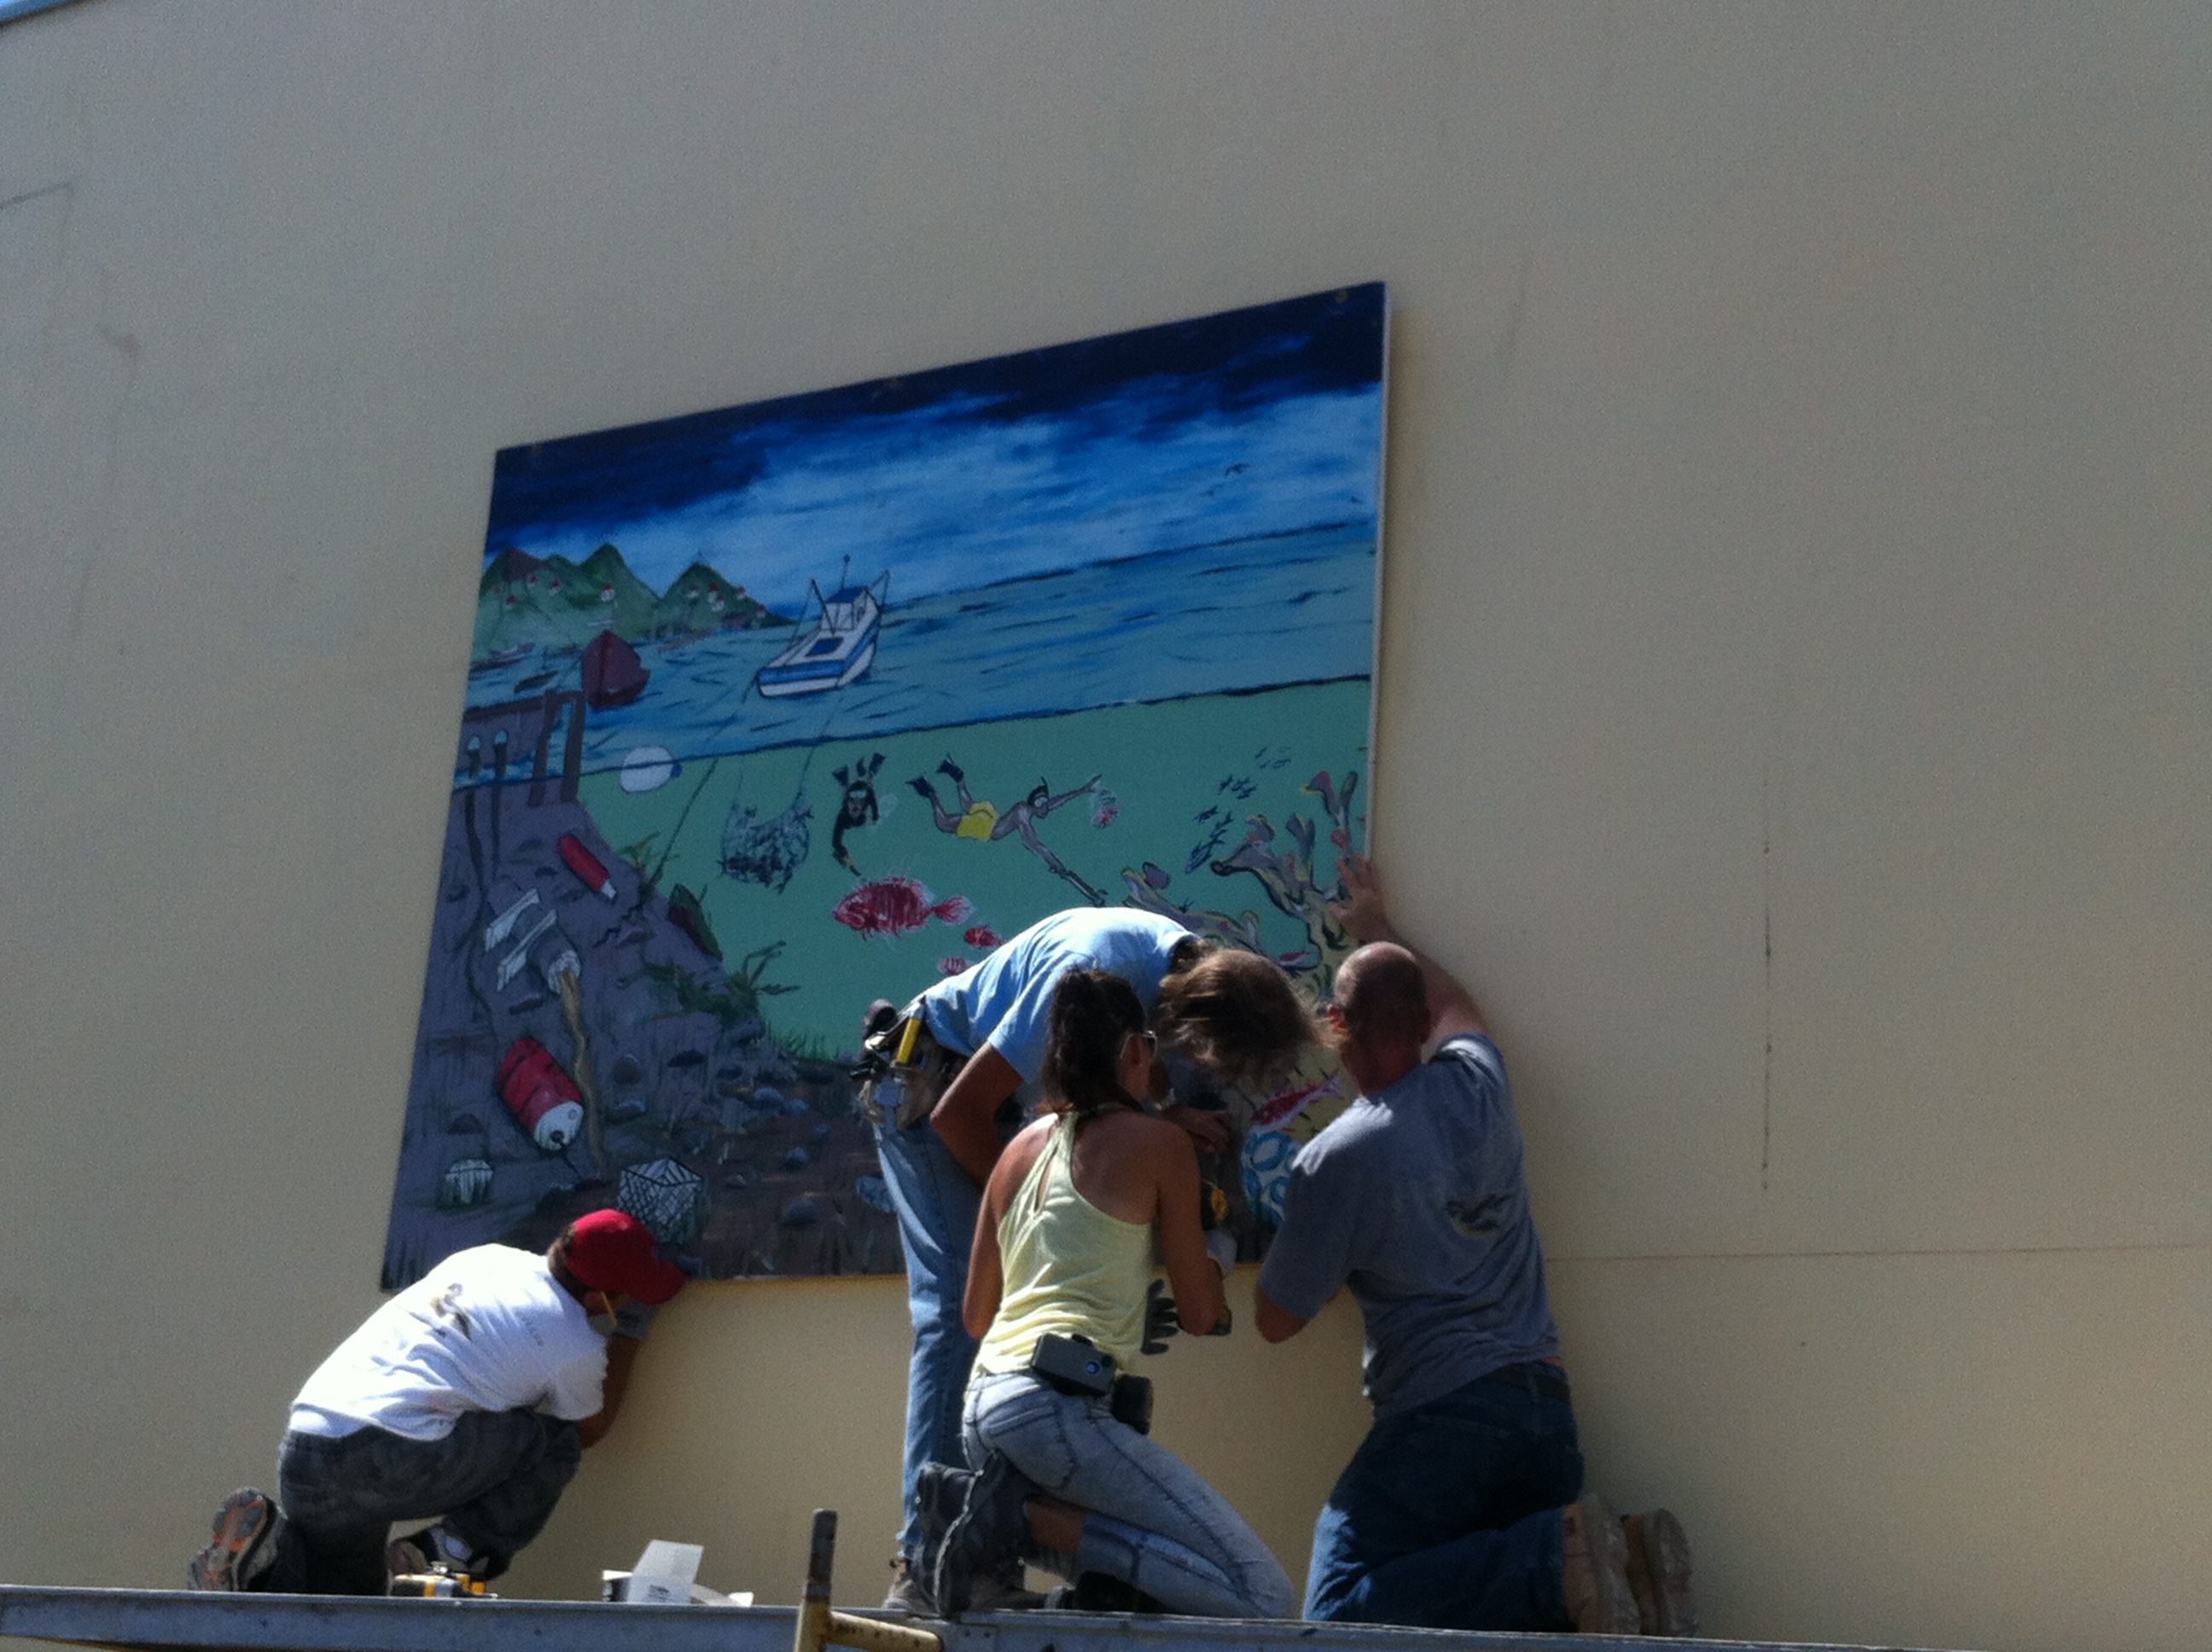 Students from St. Croix Educational Complex H.S. work on mural